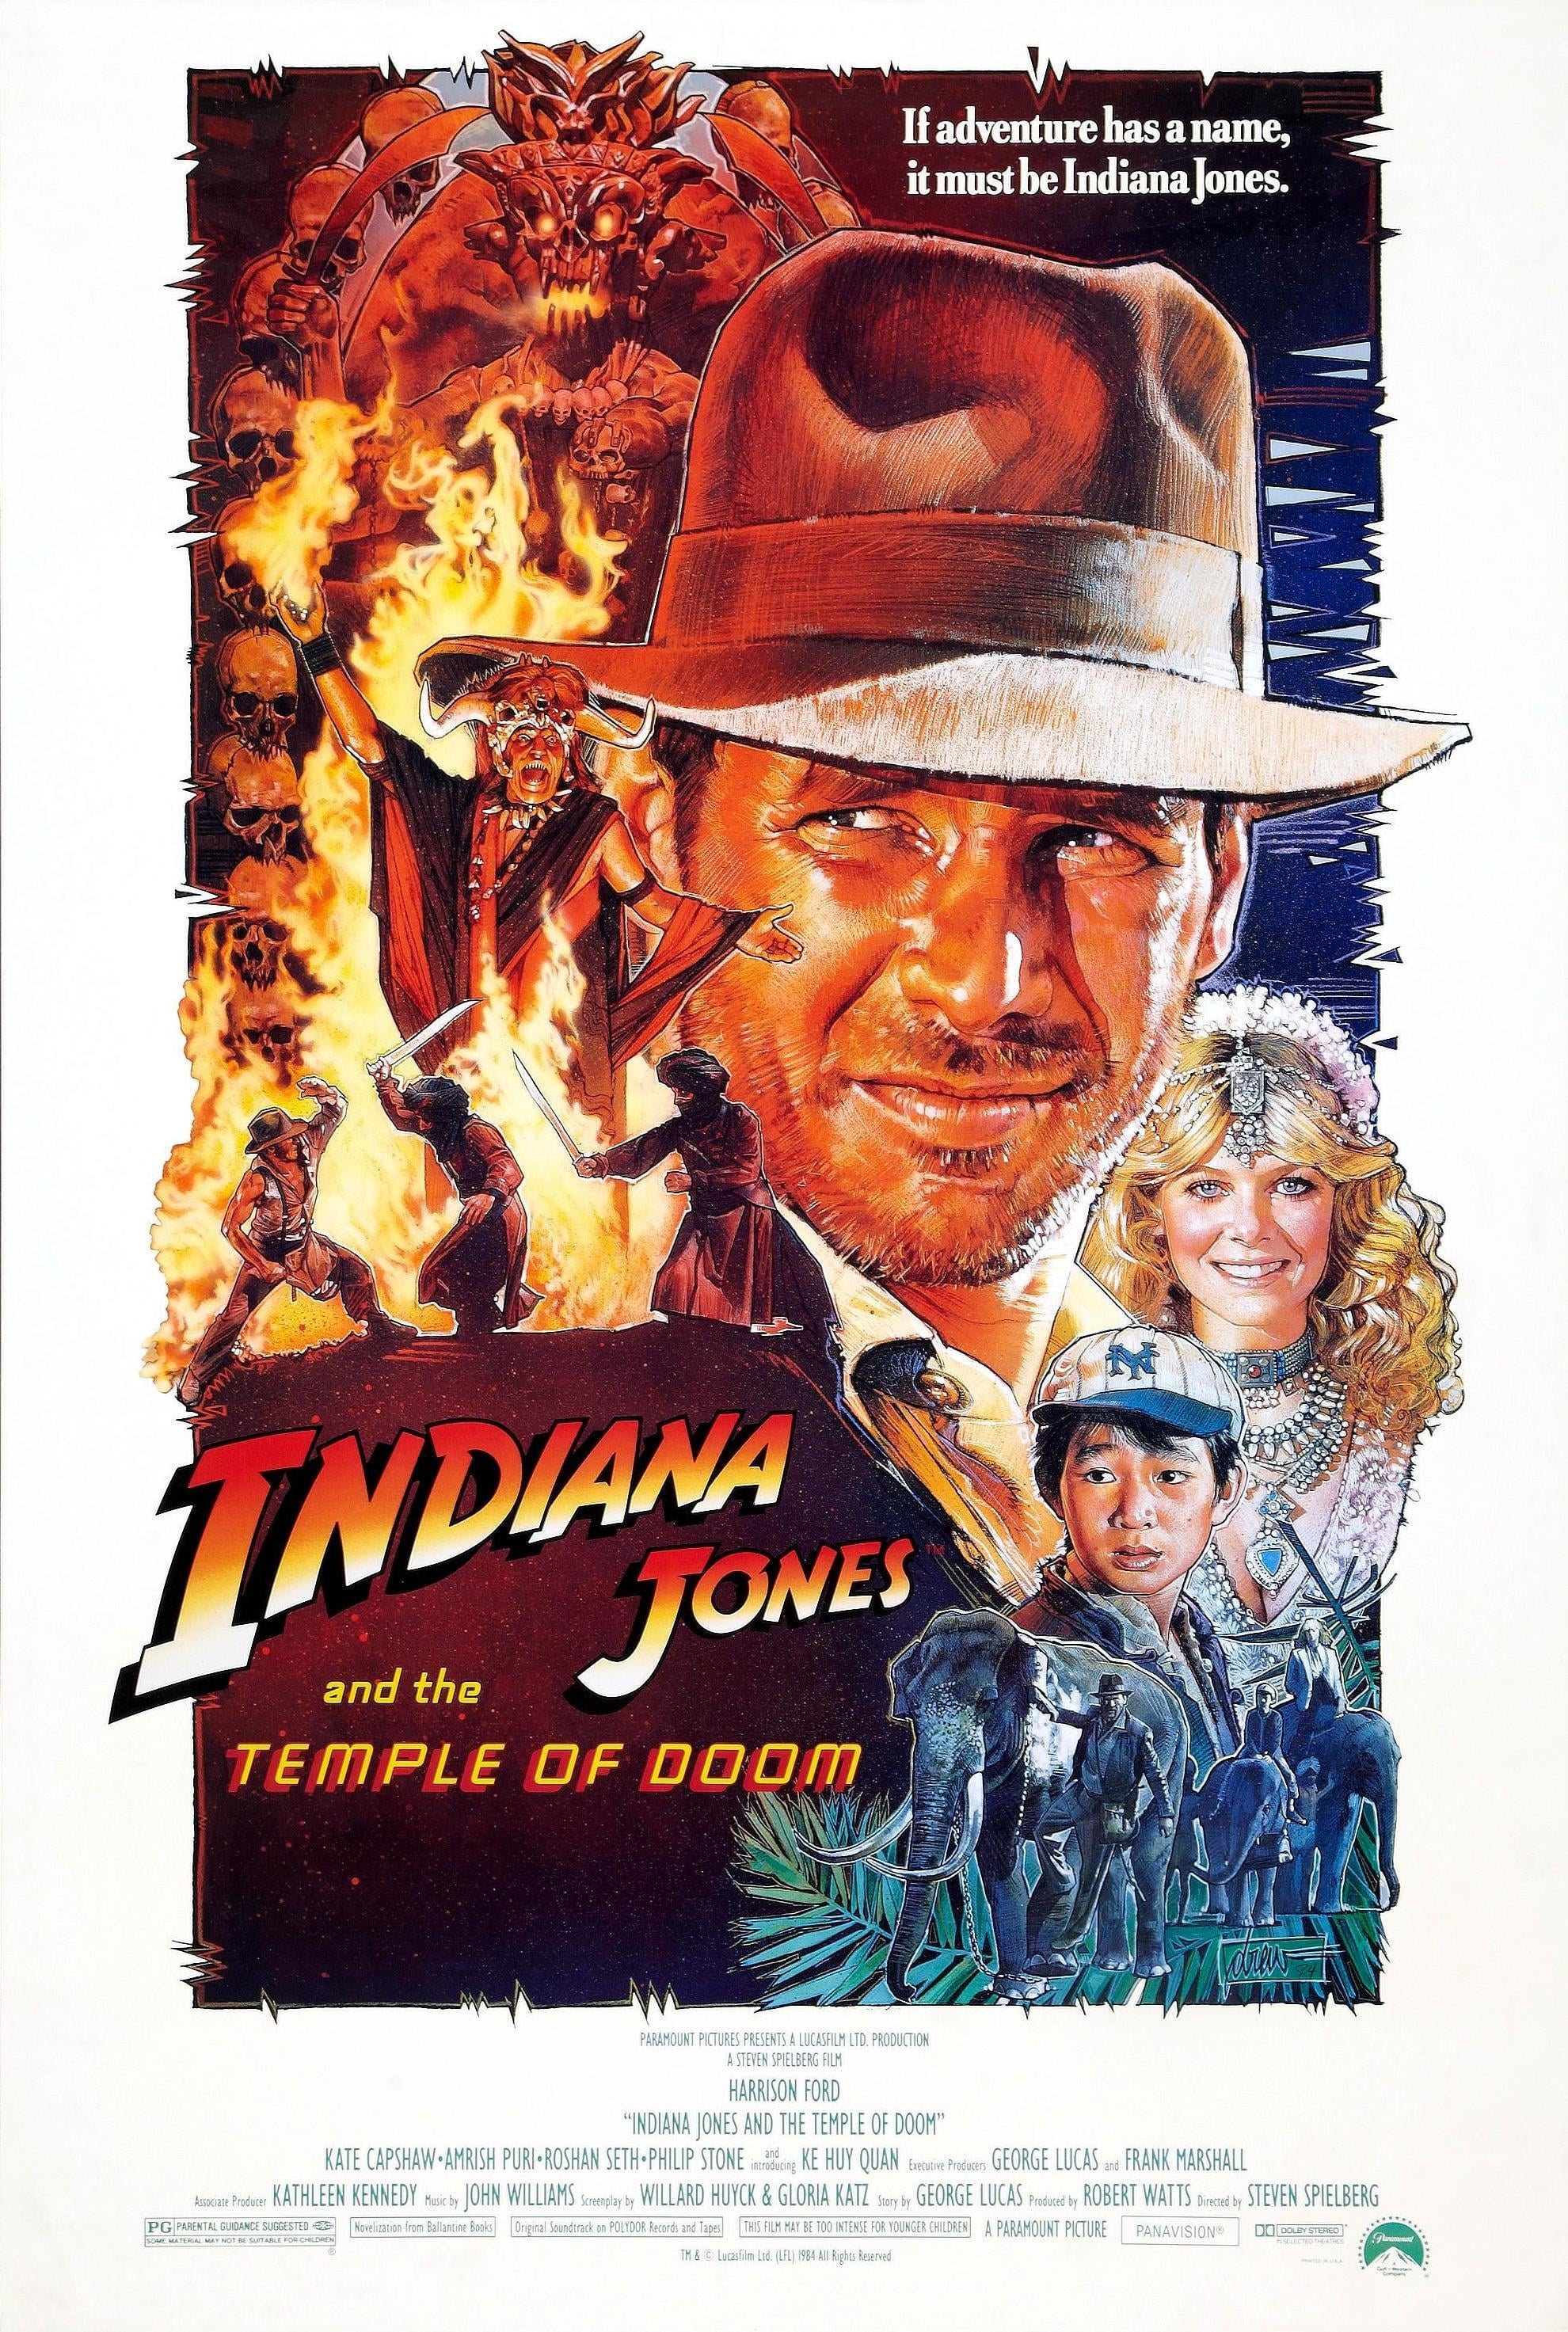 Indiana Jones 4-Film Collection - 4K UHD only Box Set w/ Map